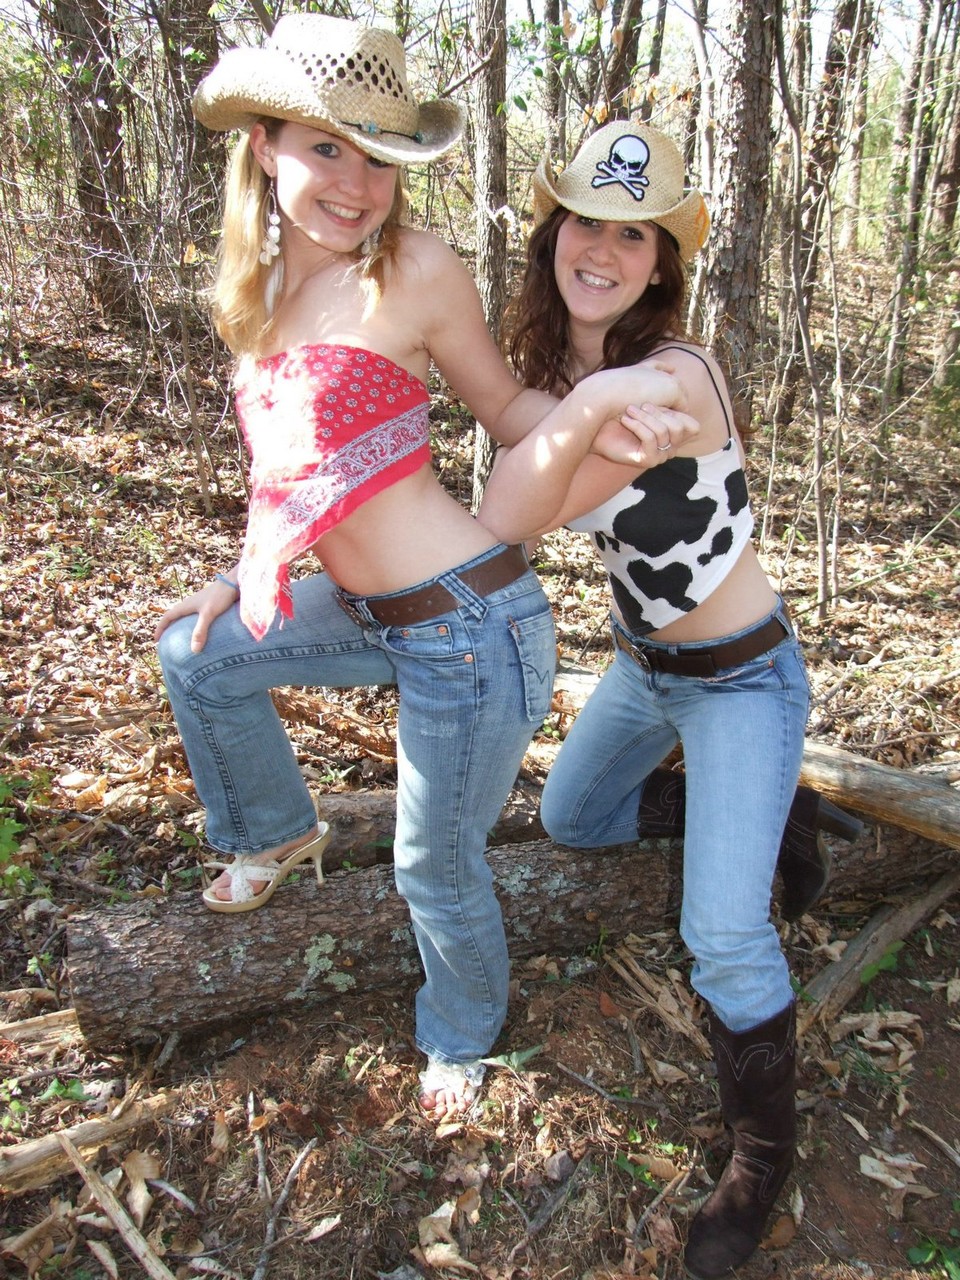 Cowgirl lesbians Kitty and Anna show their titties in the forest porn photo #427006705 | Teen Dreams Pics, Anna, Kitty, Jeans, mobile porn